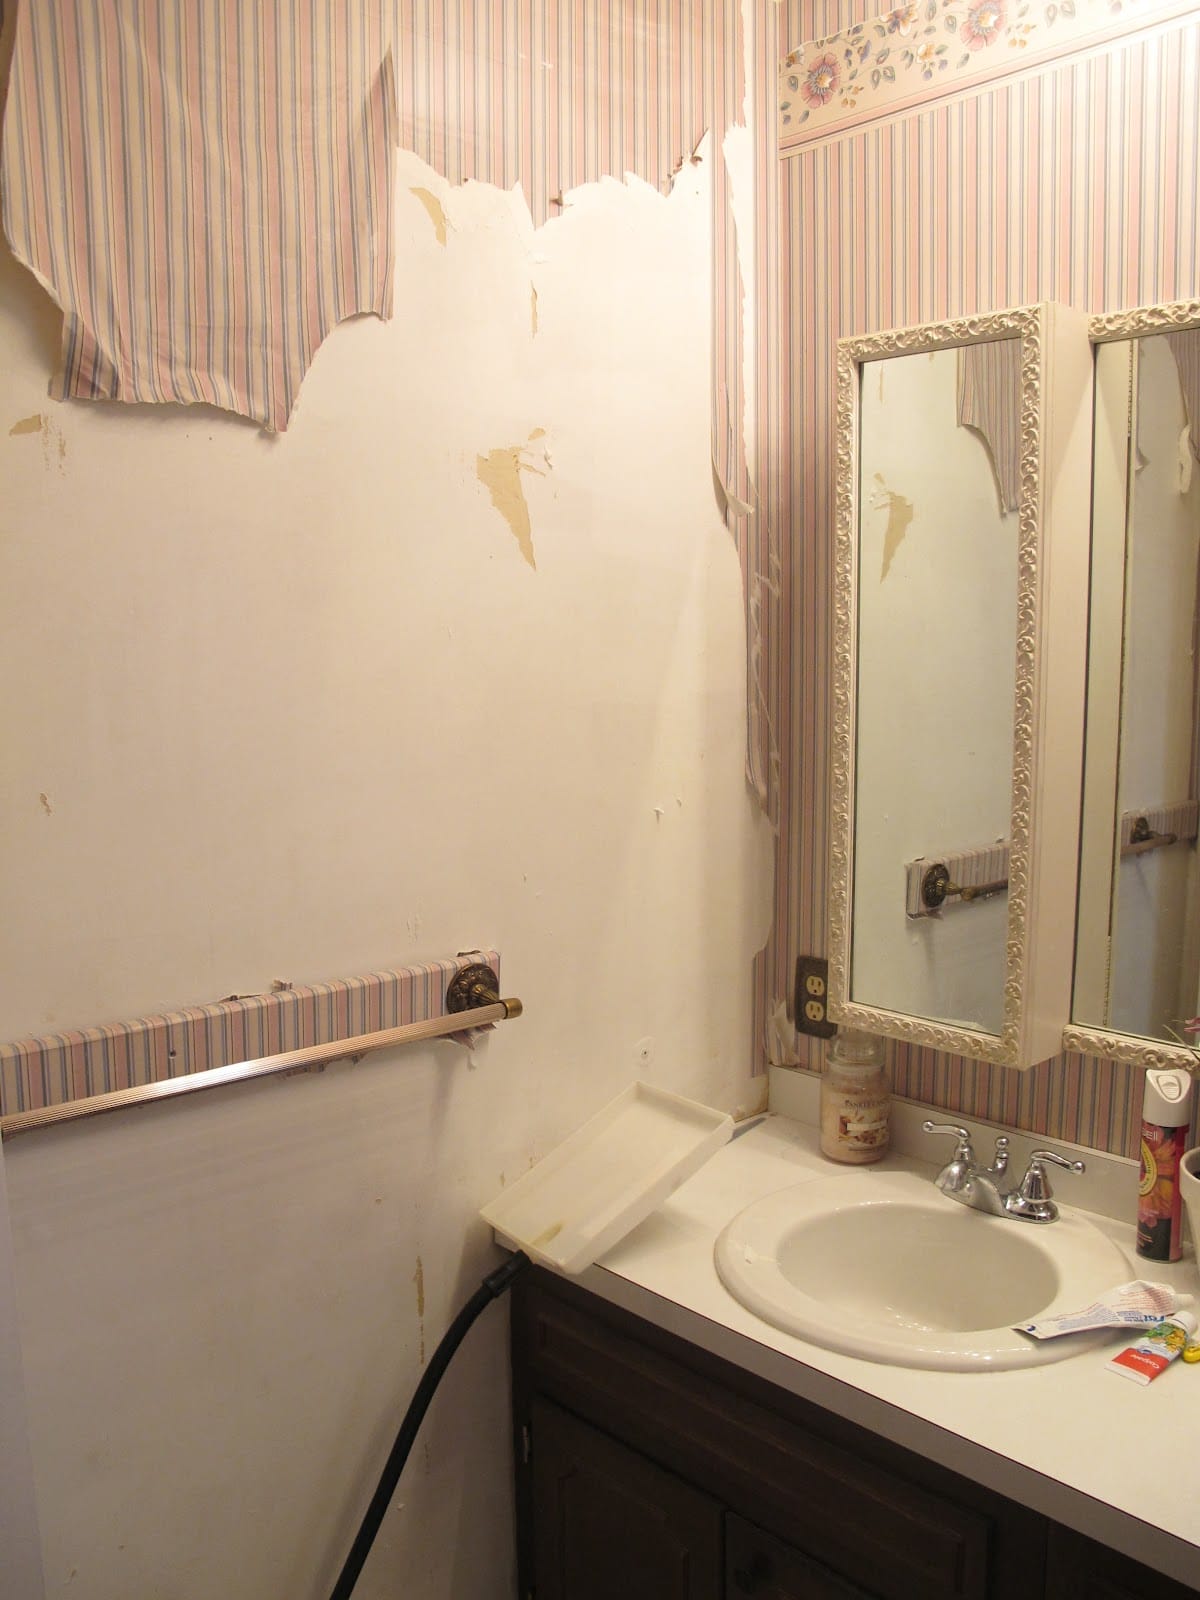 Pretty lavender bathroom makeover - Wallpaper was removed from old bathroom. - Thrift Diving